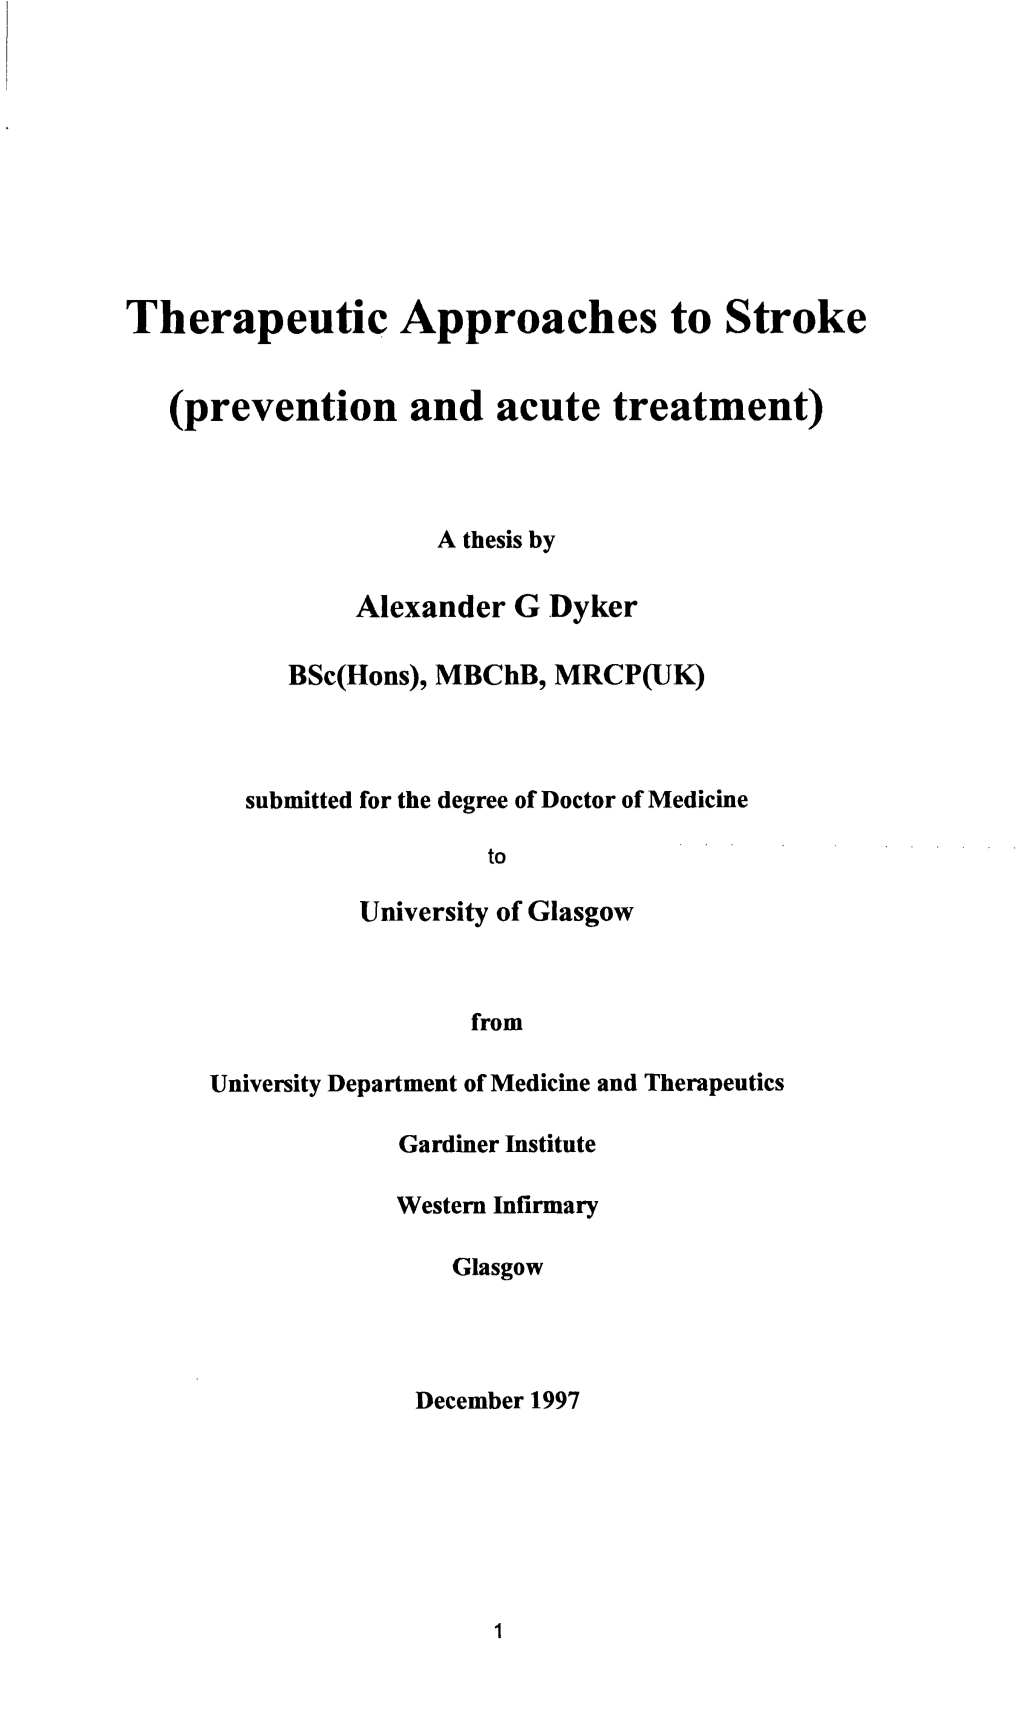 Therapeutic Approaches to Stroke (Prevention and Acute Treatment)